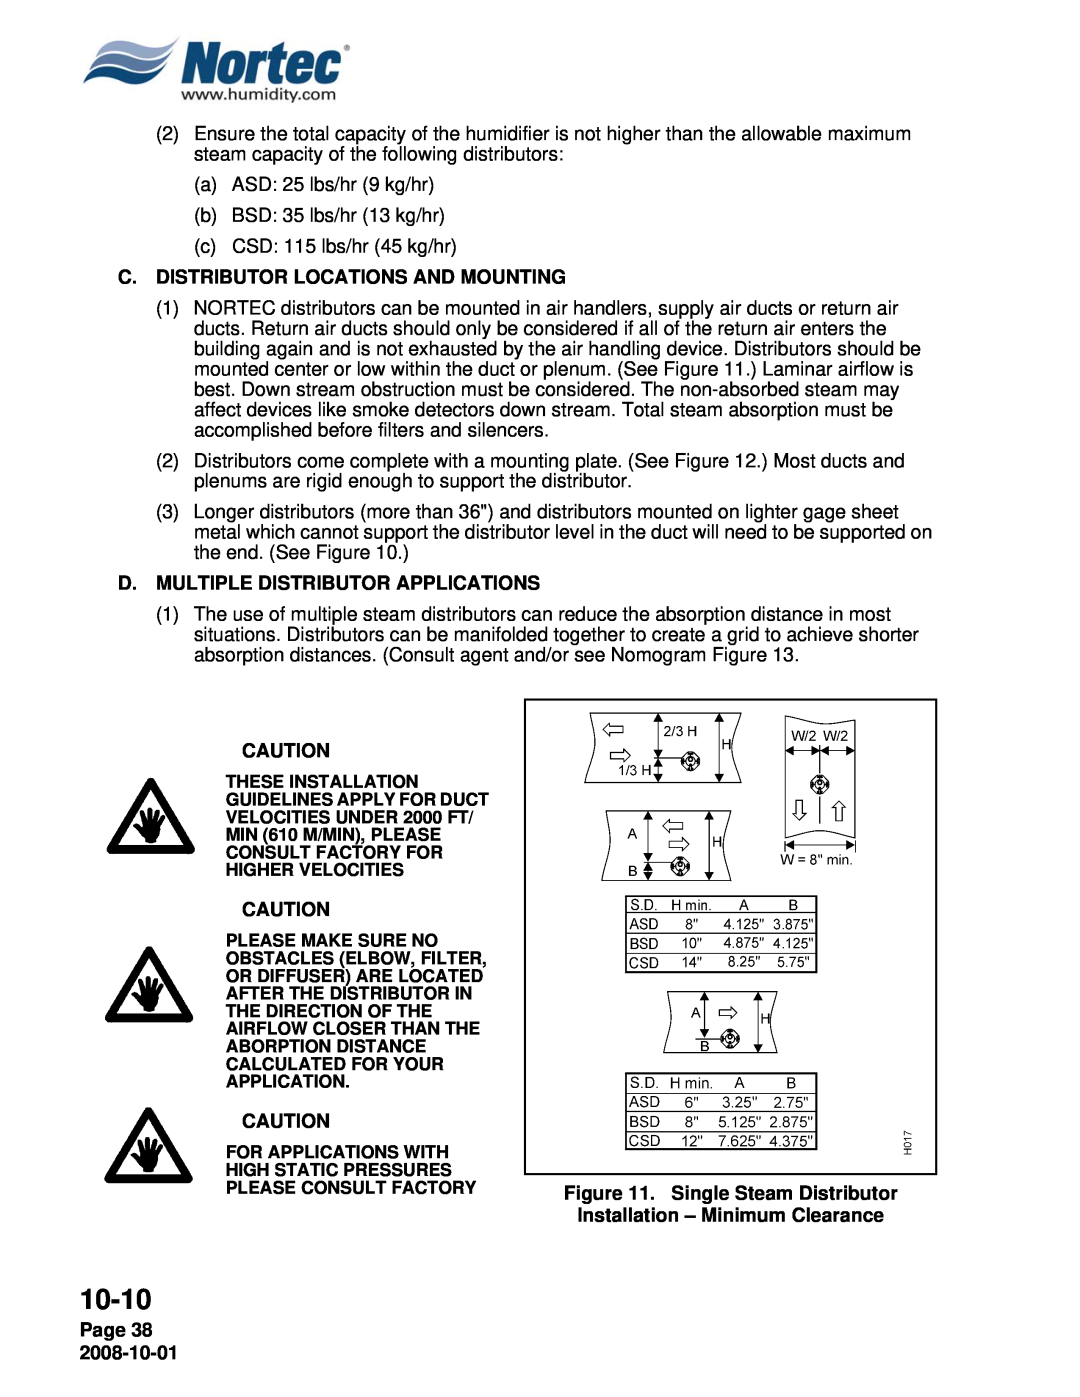 Nortec NHPC, NHTC manual 10-10, C.Distributor Locations And Mounting, D.Multiple Distributor Applications, Page 38 